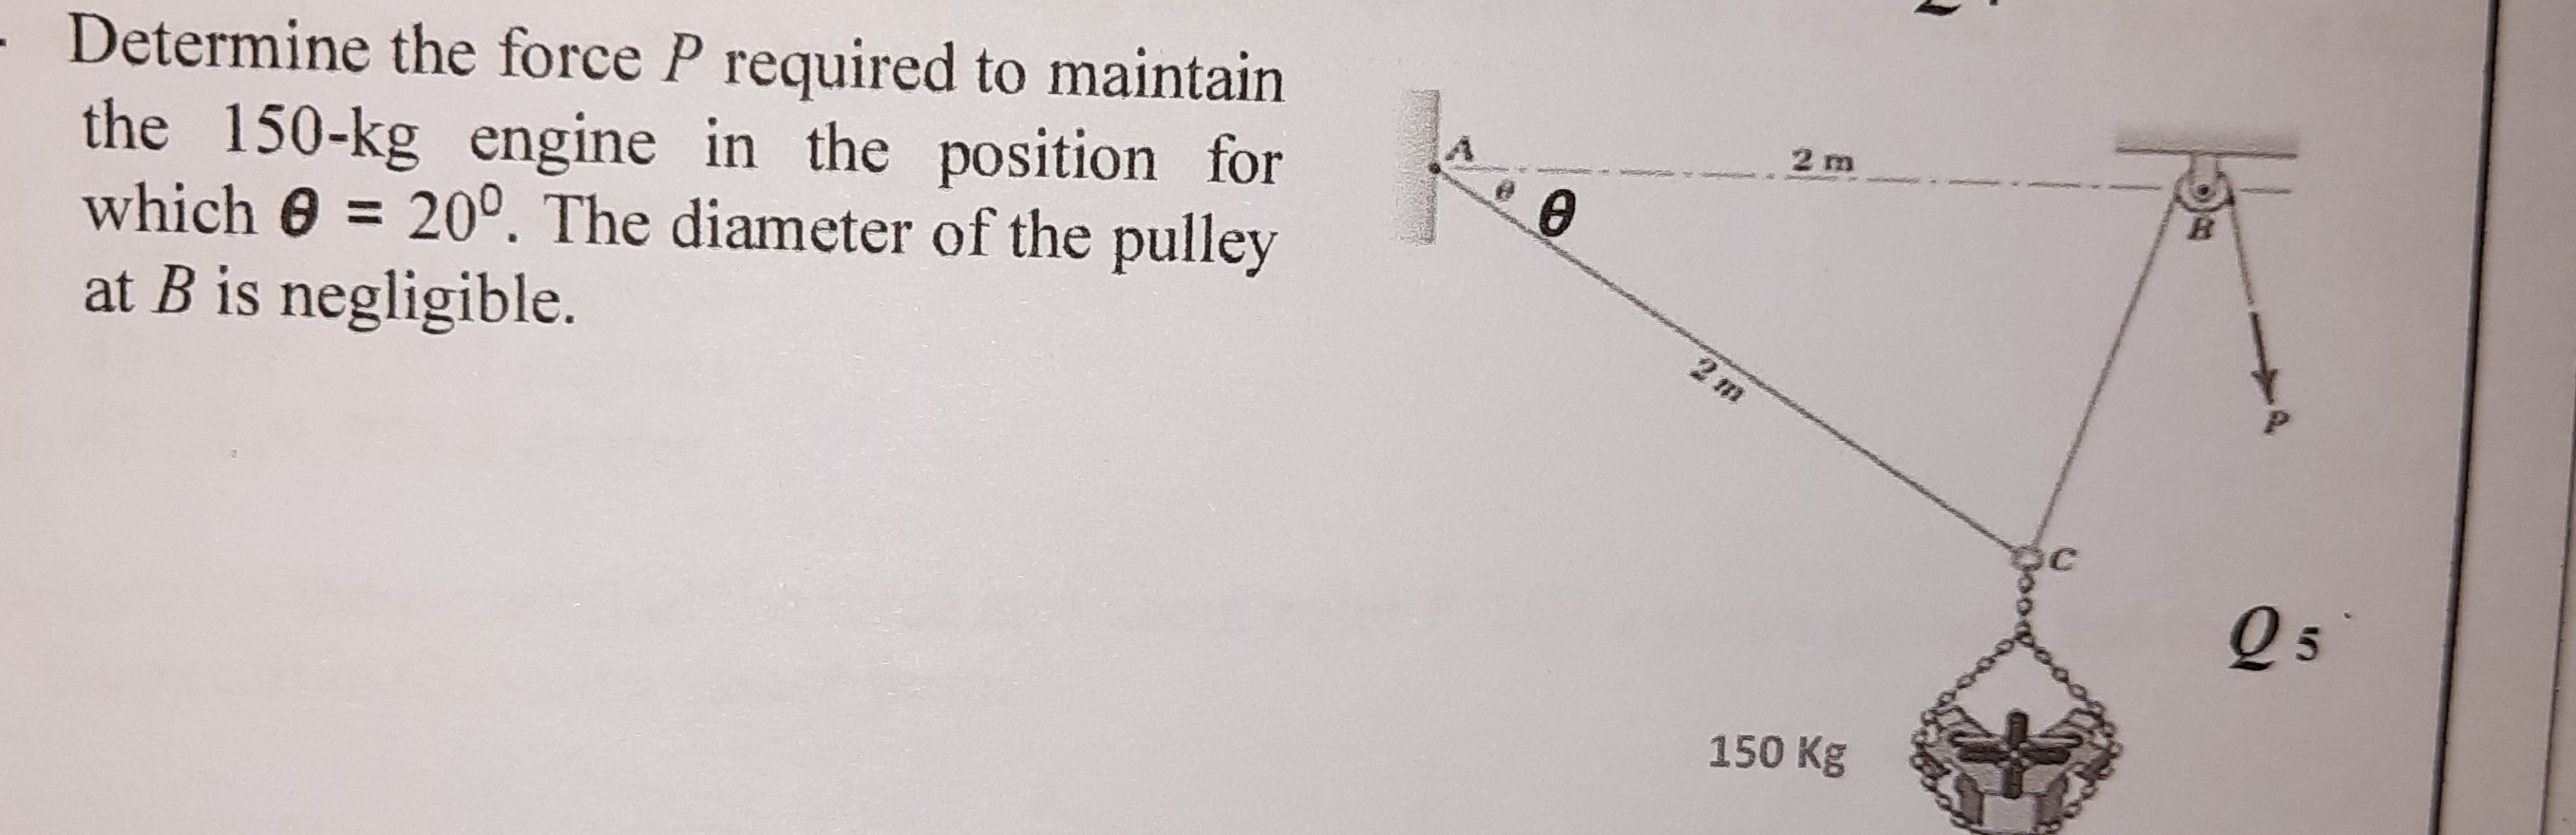 - Determine the force P required to maintain
the 150-kg engine in the position for
which 0 = 20°. The diameter of the pulley
at B is negligible.
2 m
2 m
Q 5
150 Kg
